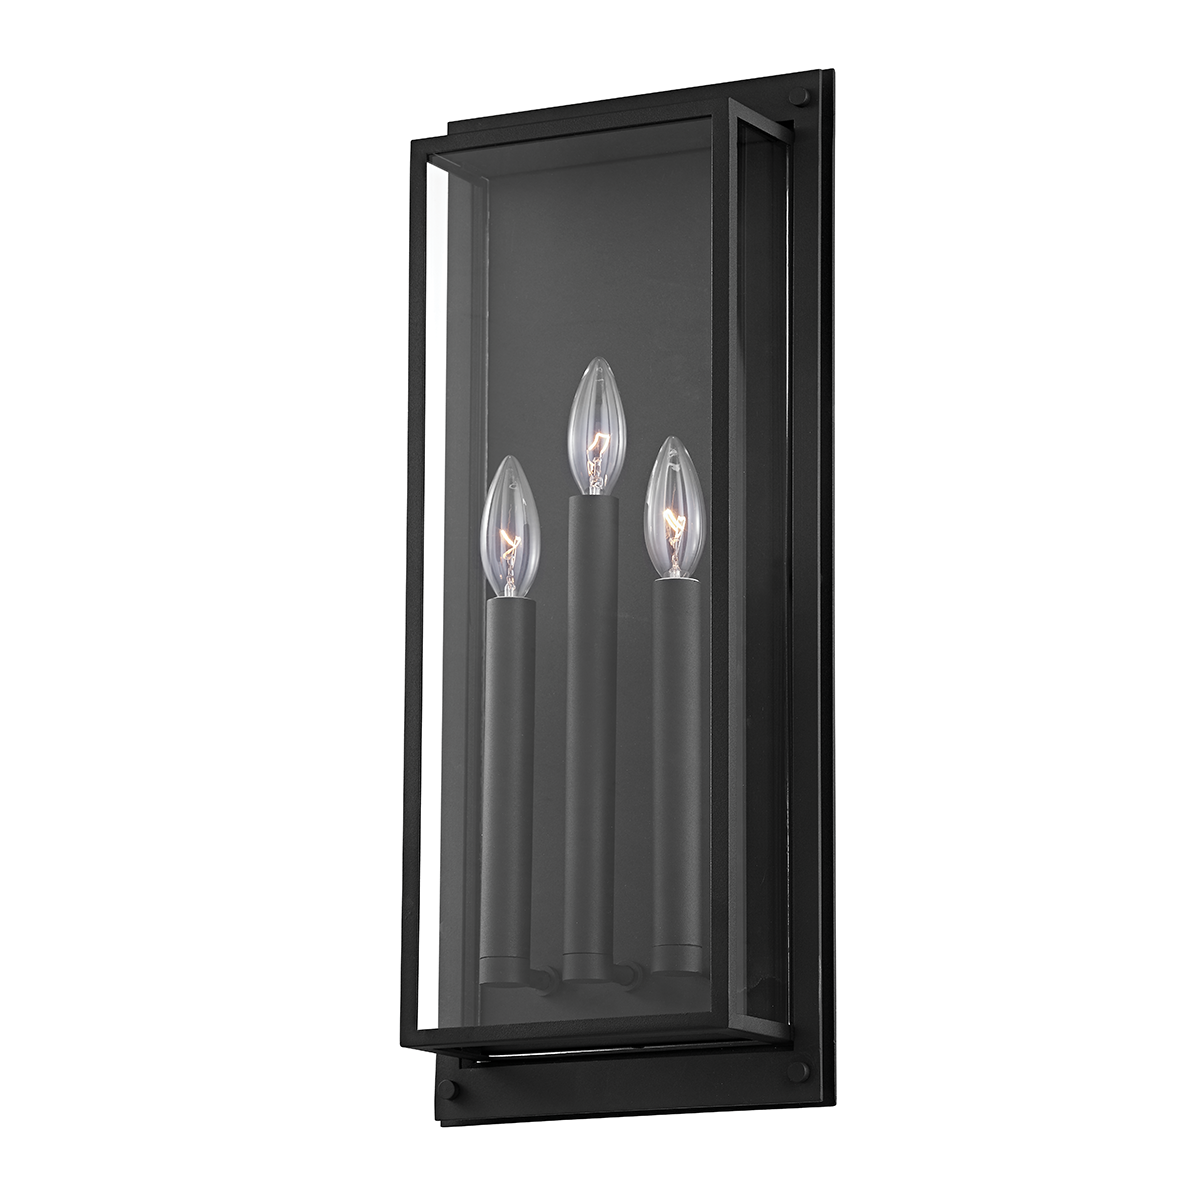 Troy WINSLOW 1 LIGHT LARGE EXTERIOR WALL SCONCE B9103 Outdoor l Wall Troy Lighting   